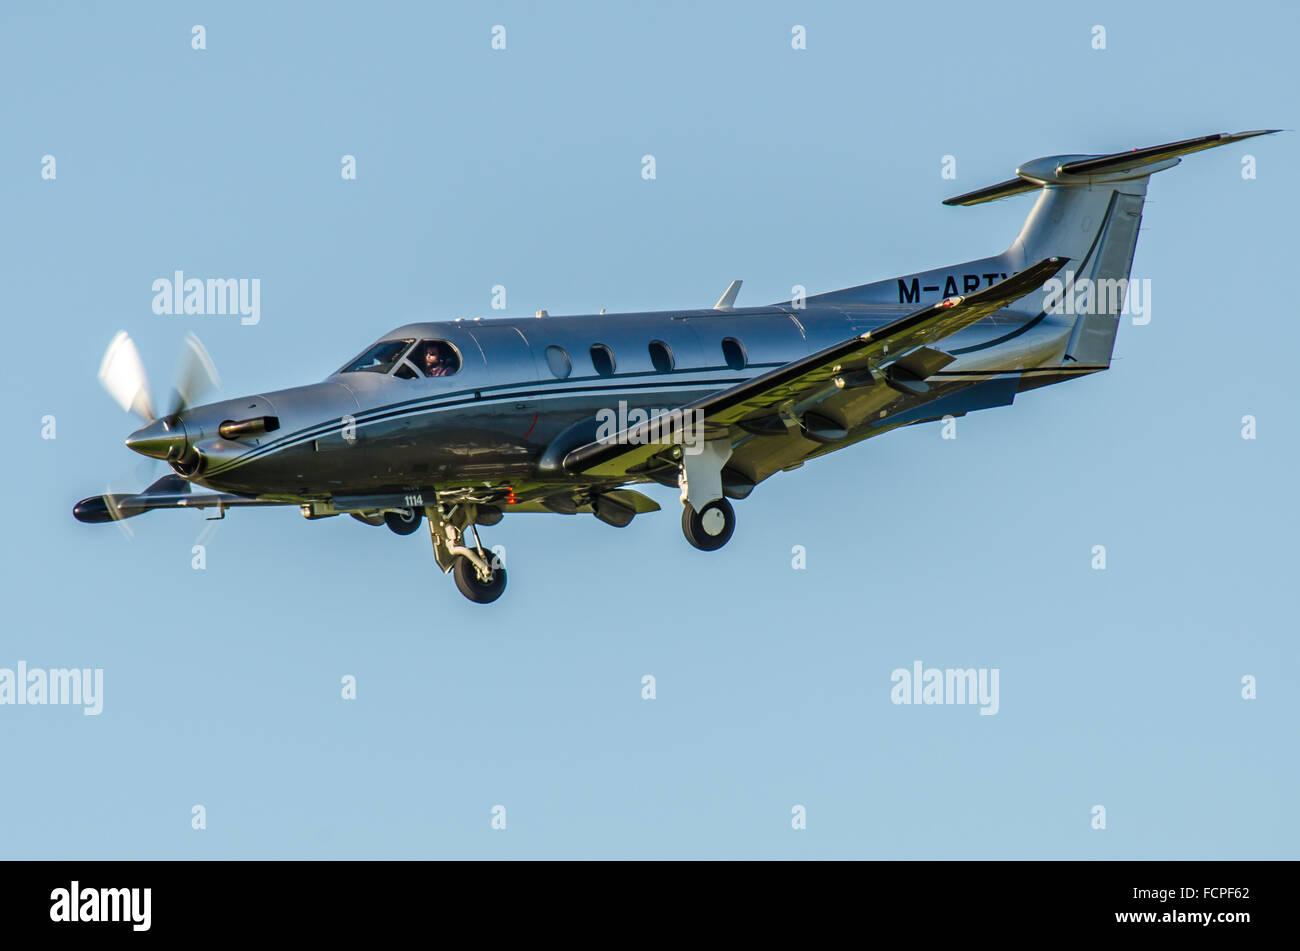 Pilatus PC-12 M-ARTY is owned by Creston (UK) Ltd, seen here 'going around' before landing at Goodwood Aerodrome. Space for copy Stock Photo